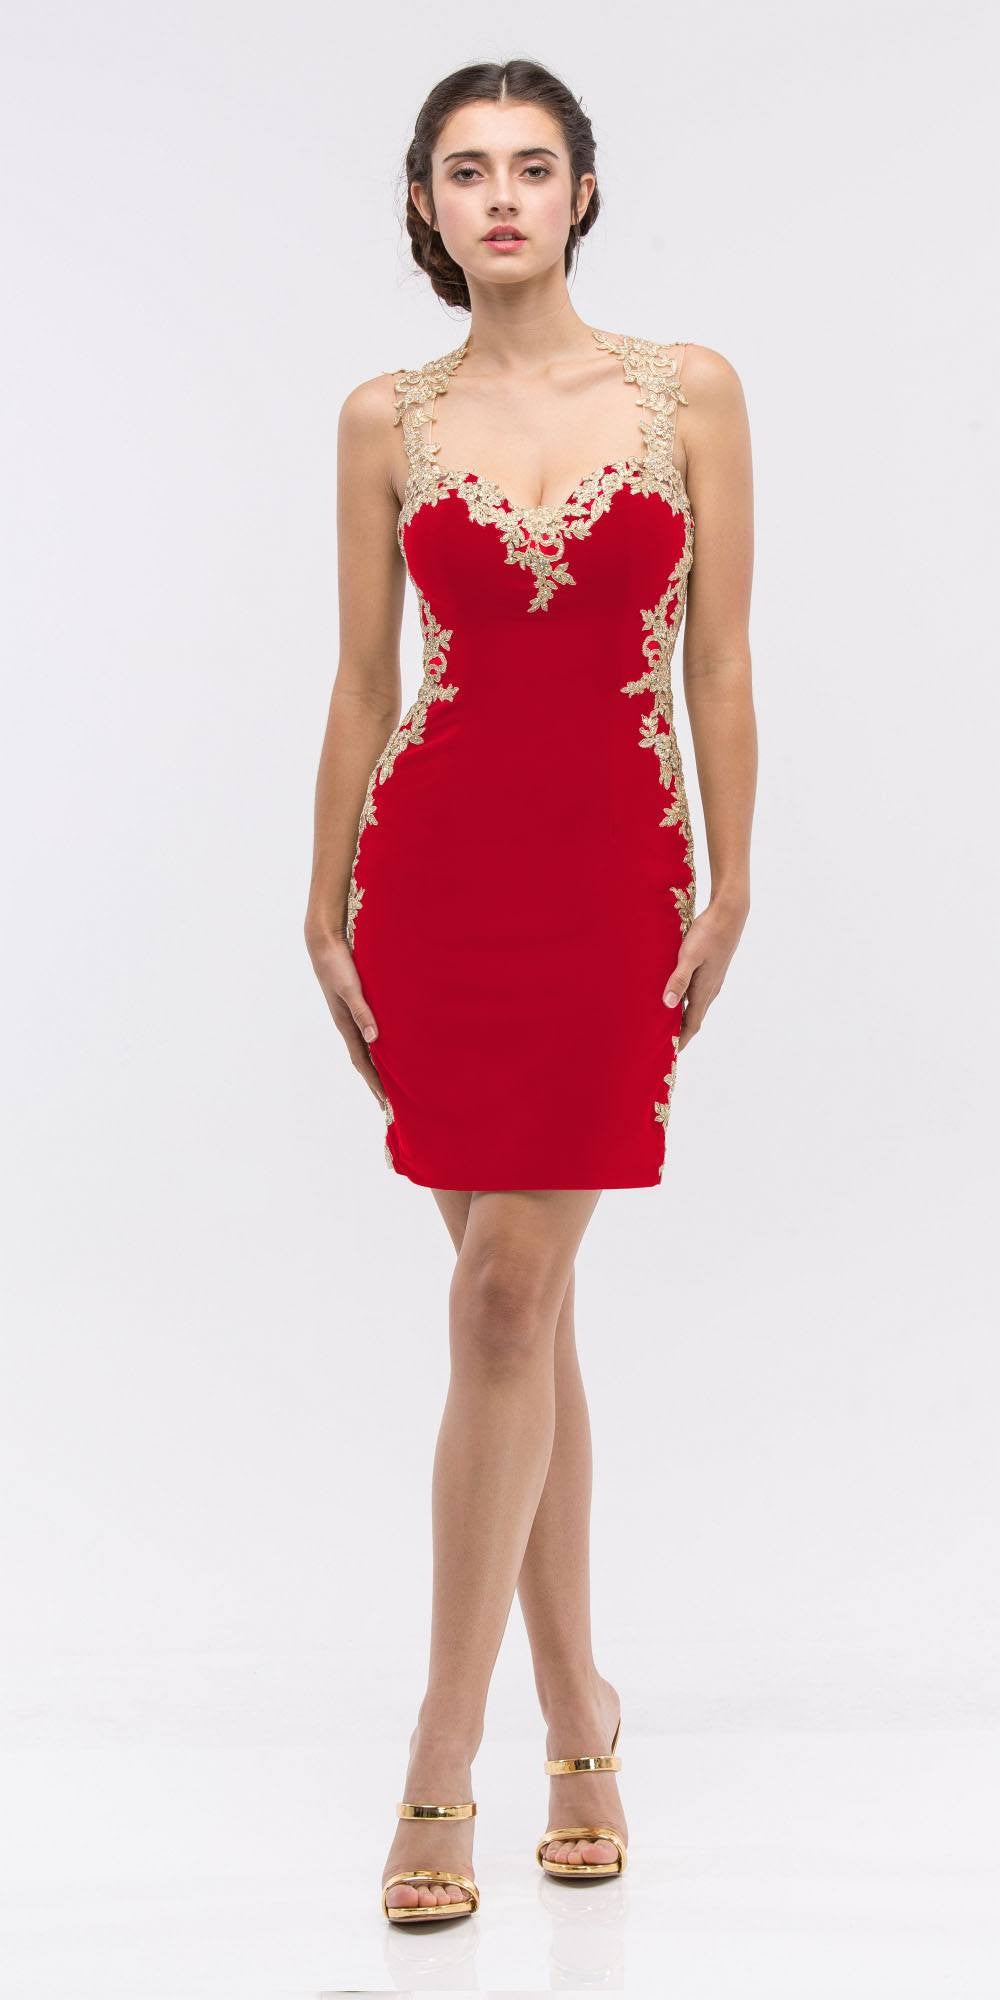 Appliqued Sweetheart Neckline Bodycon Short Prom Dress Red